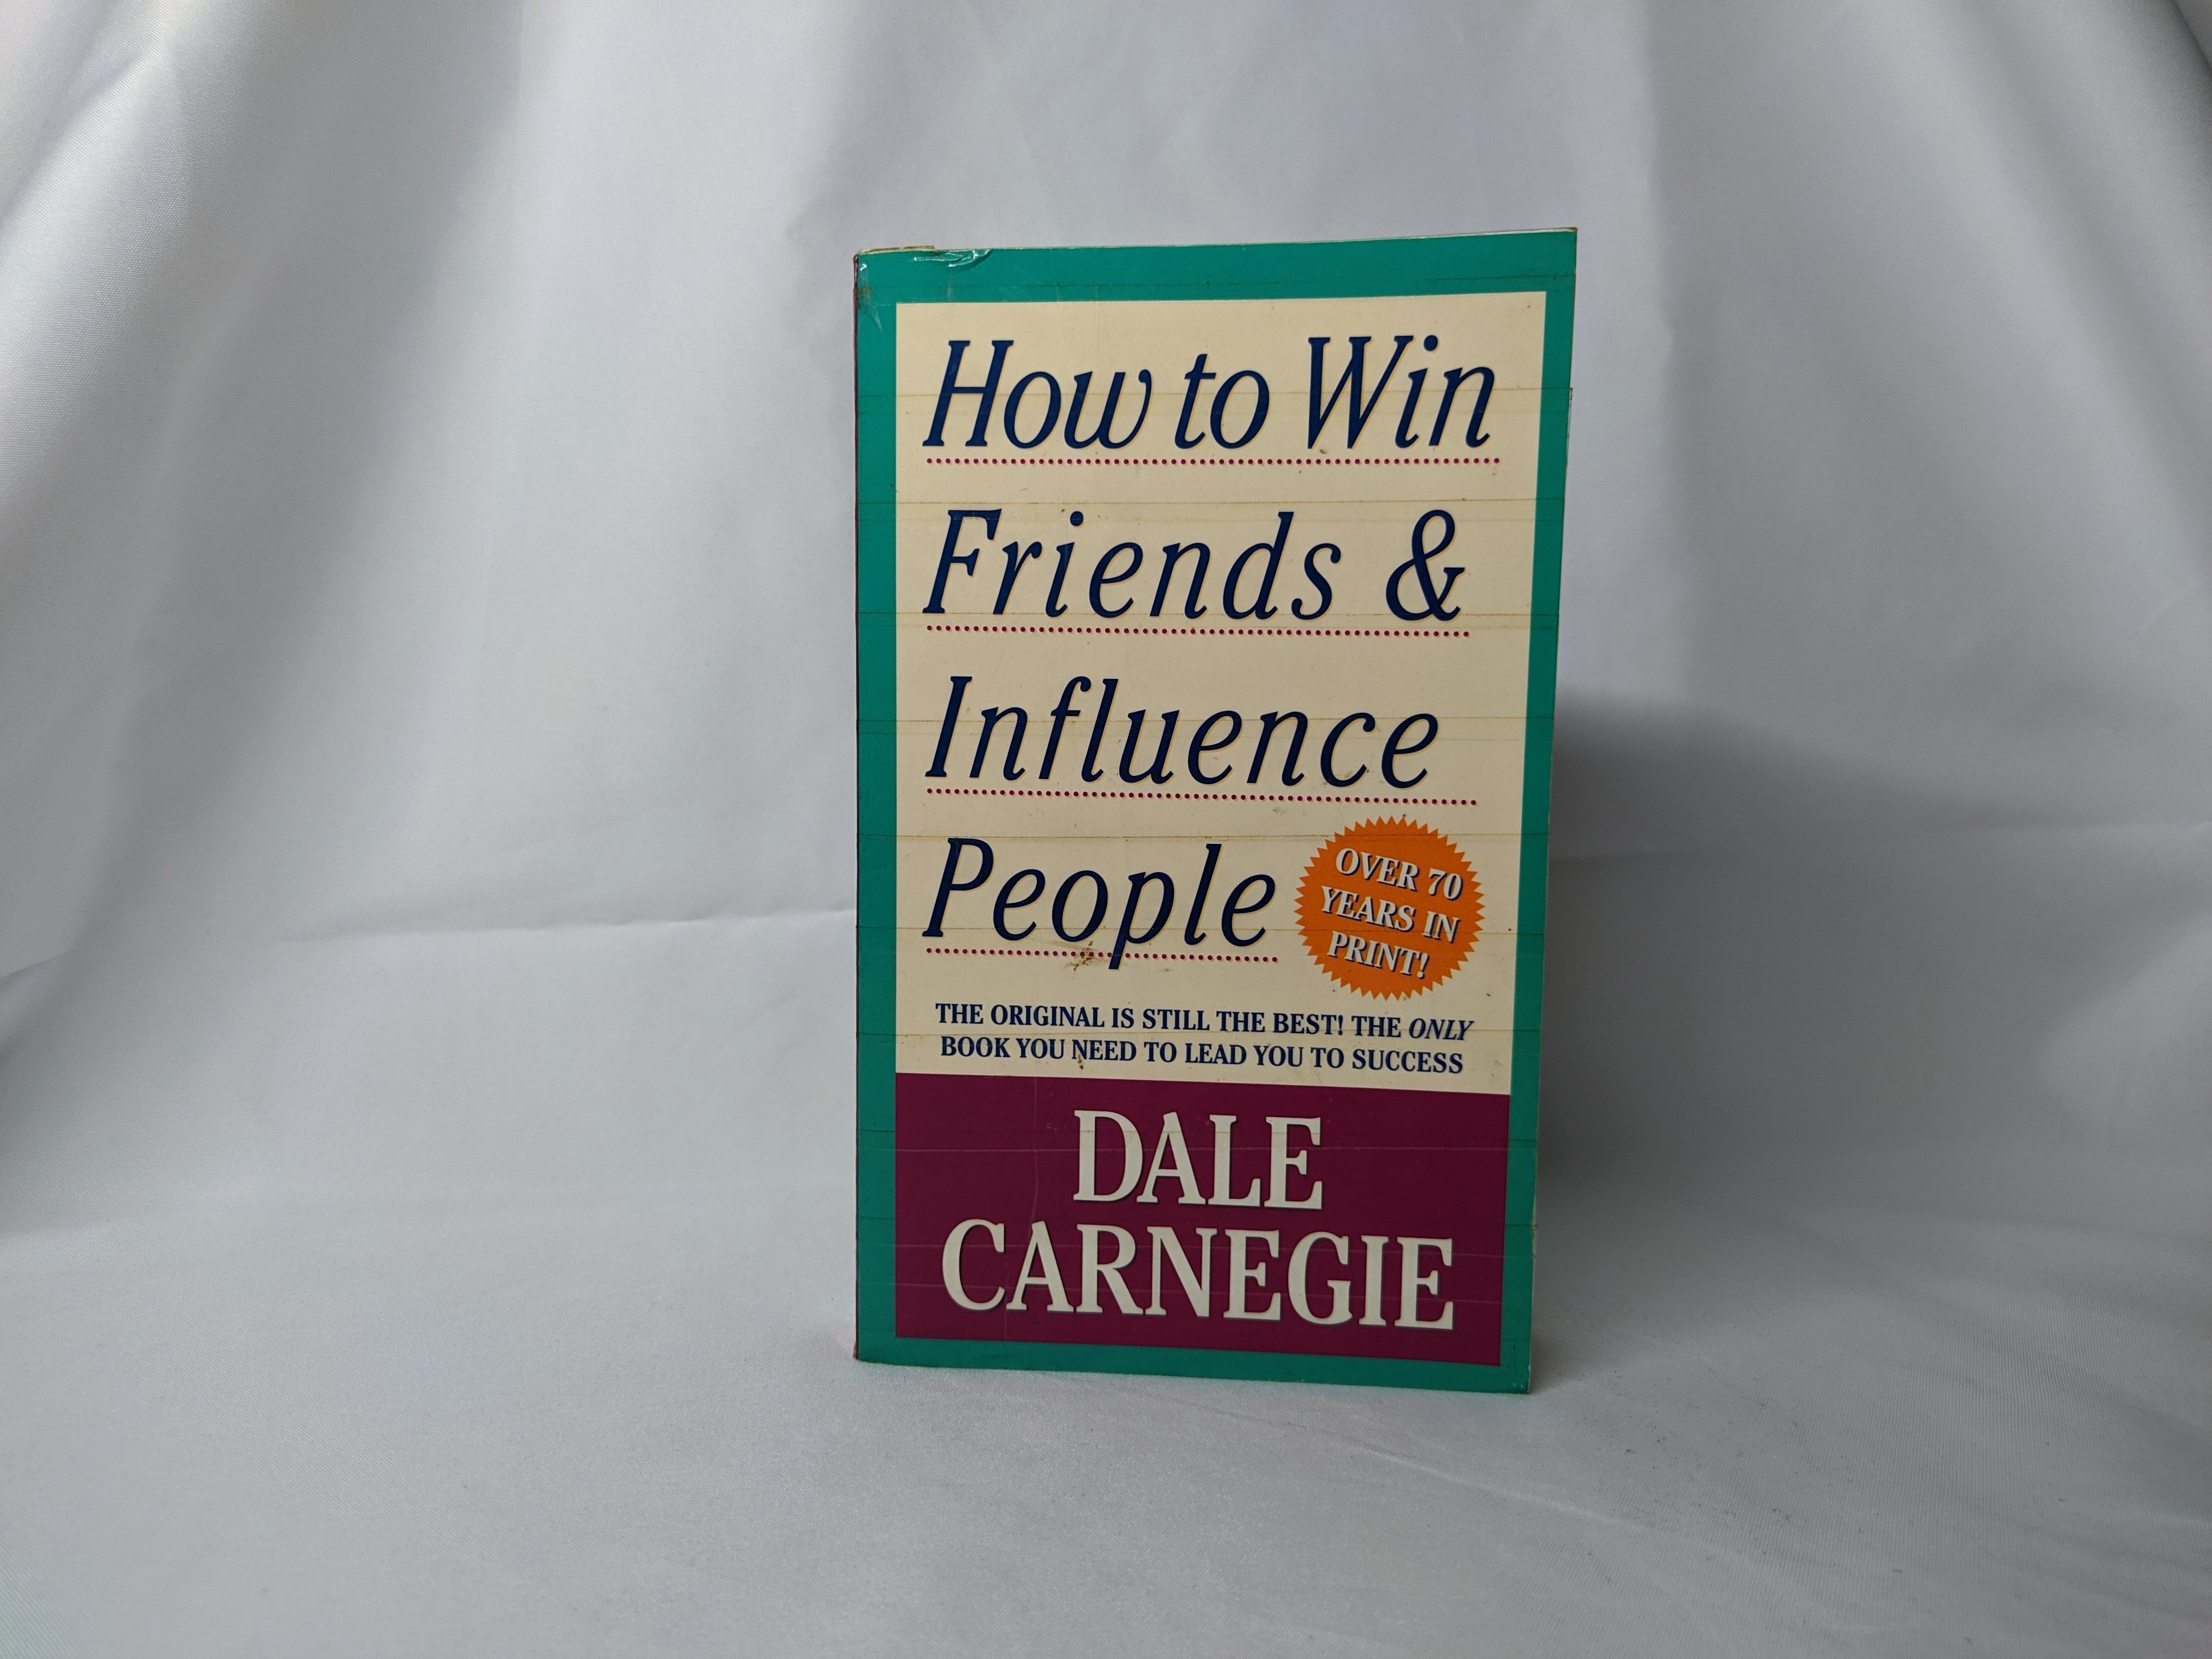 A copy of "How to Win Friends & Influence People" by Dale Carnegie on display | Source: Shutterstock